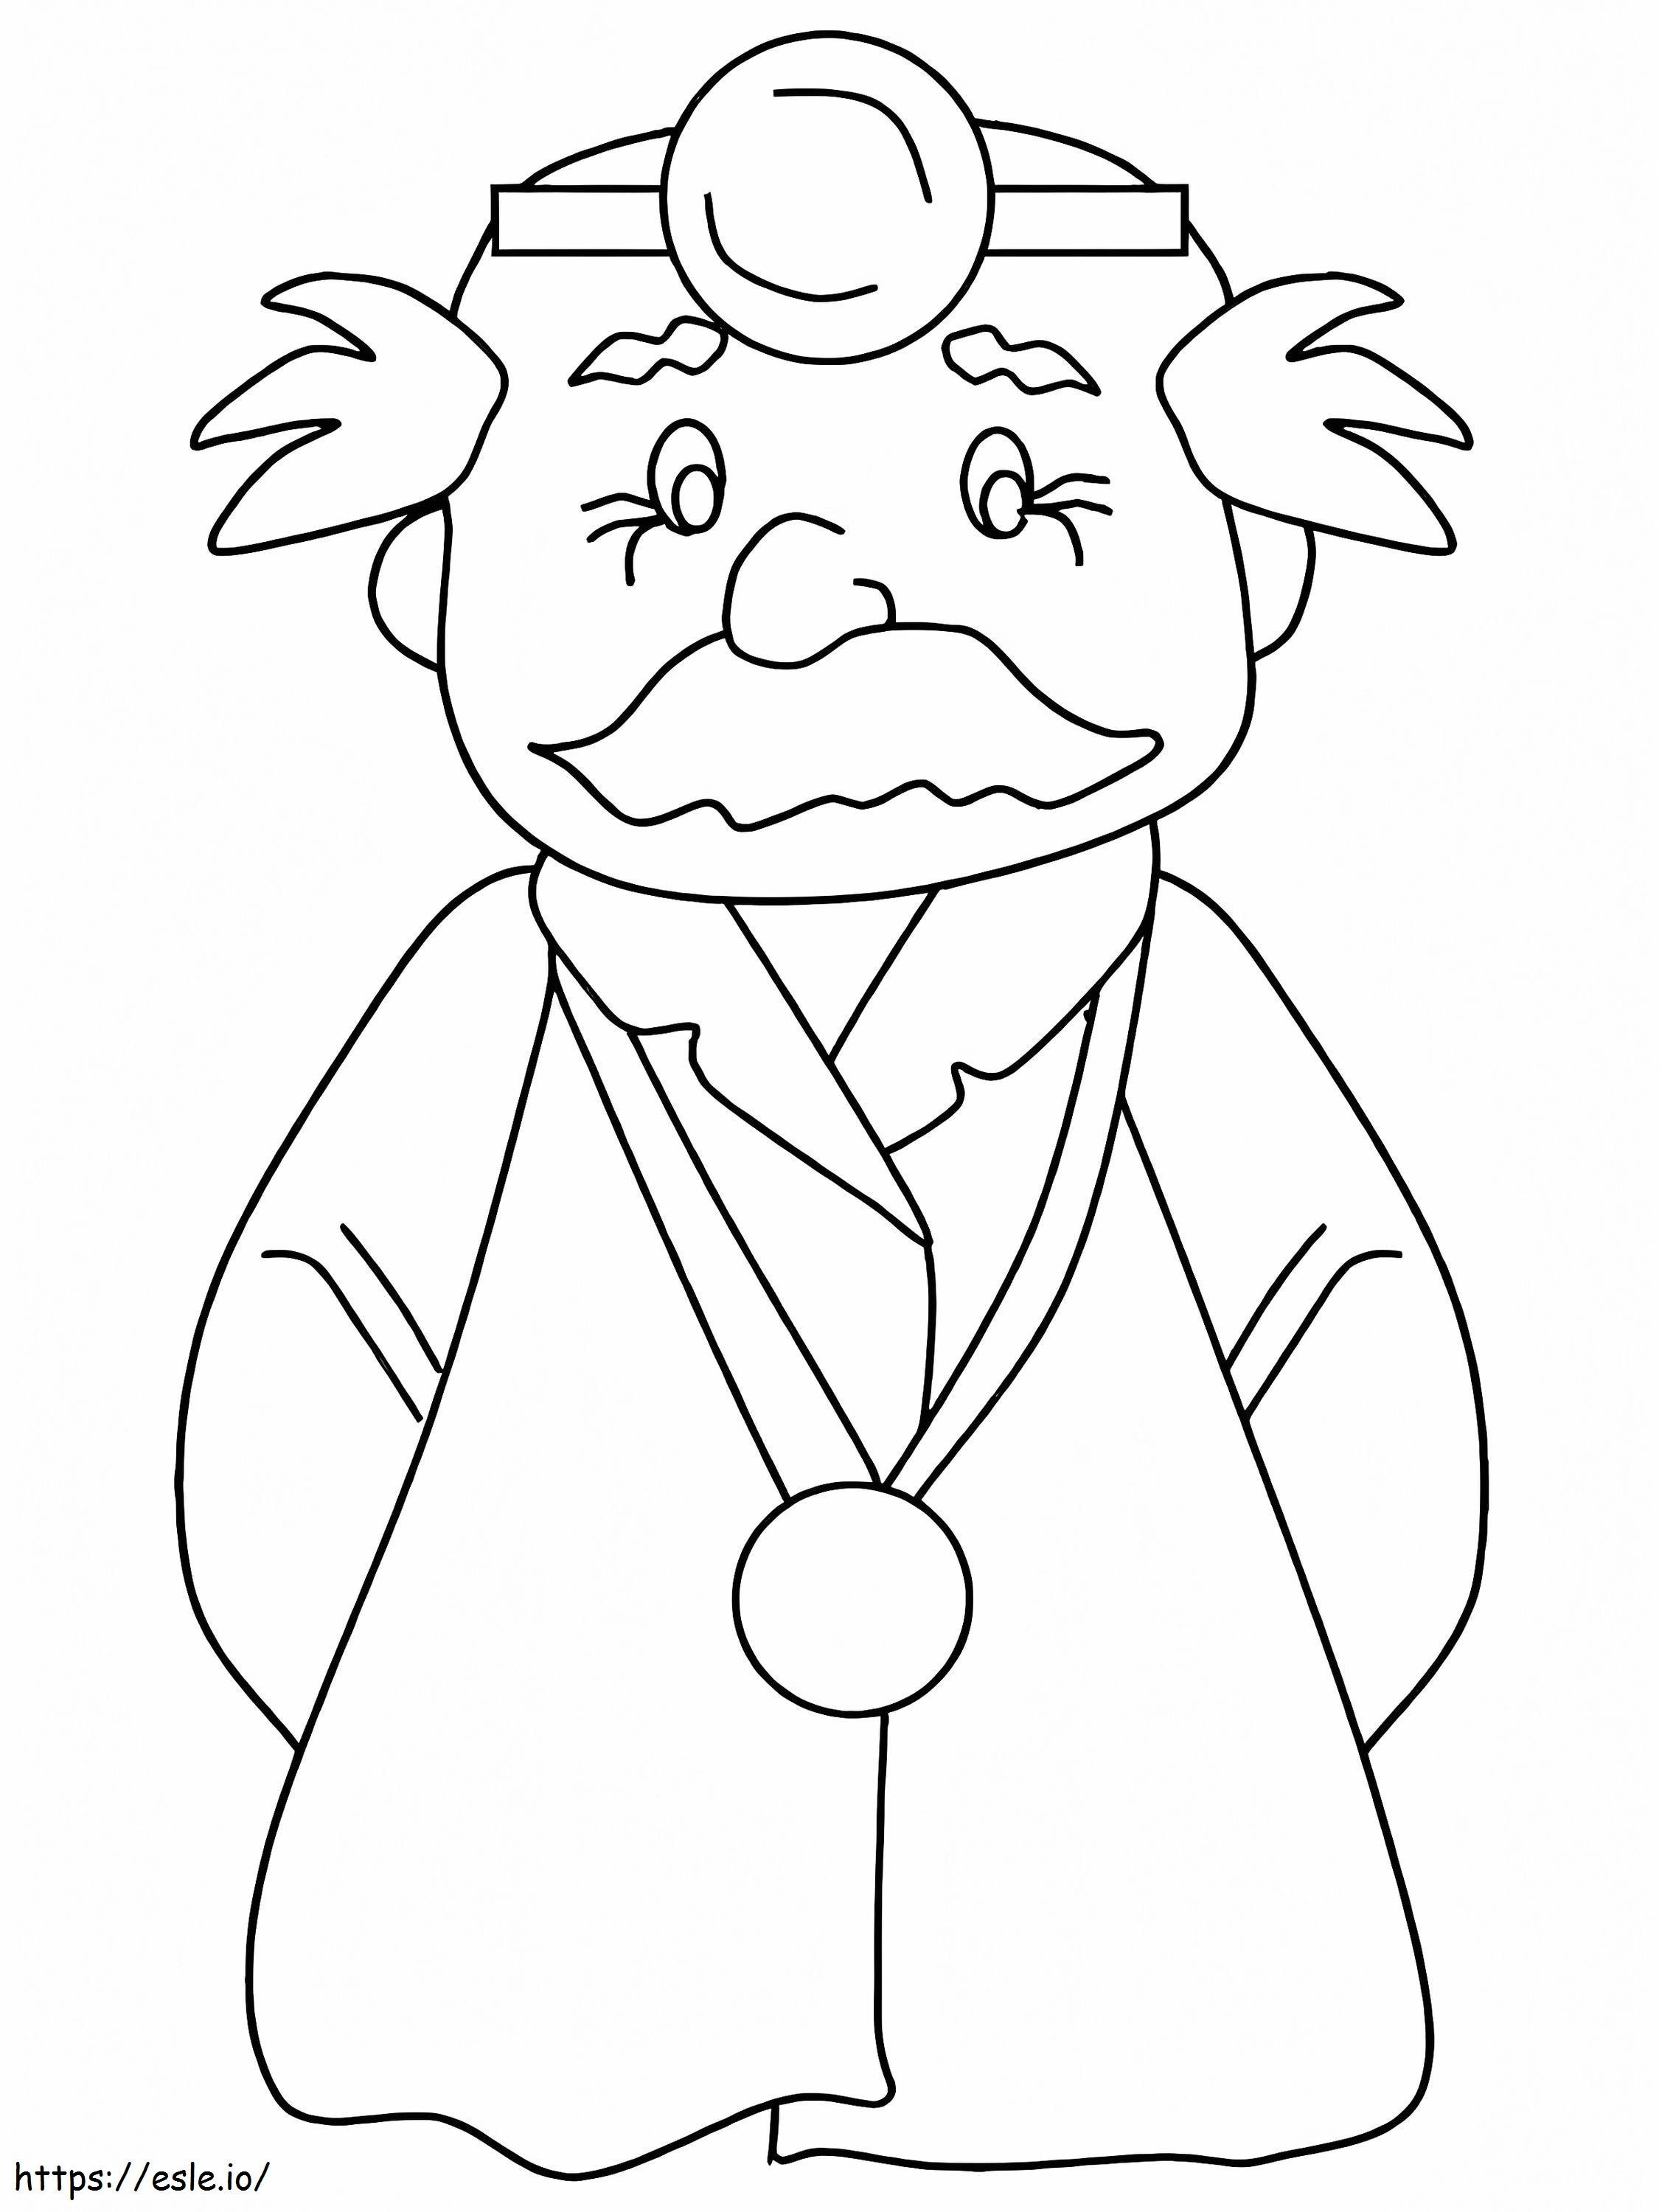 Old Doctor coloring page